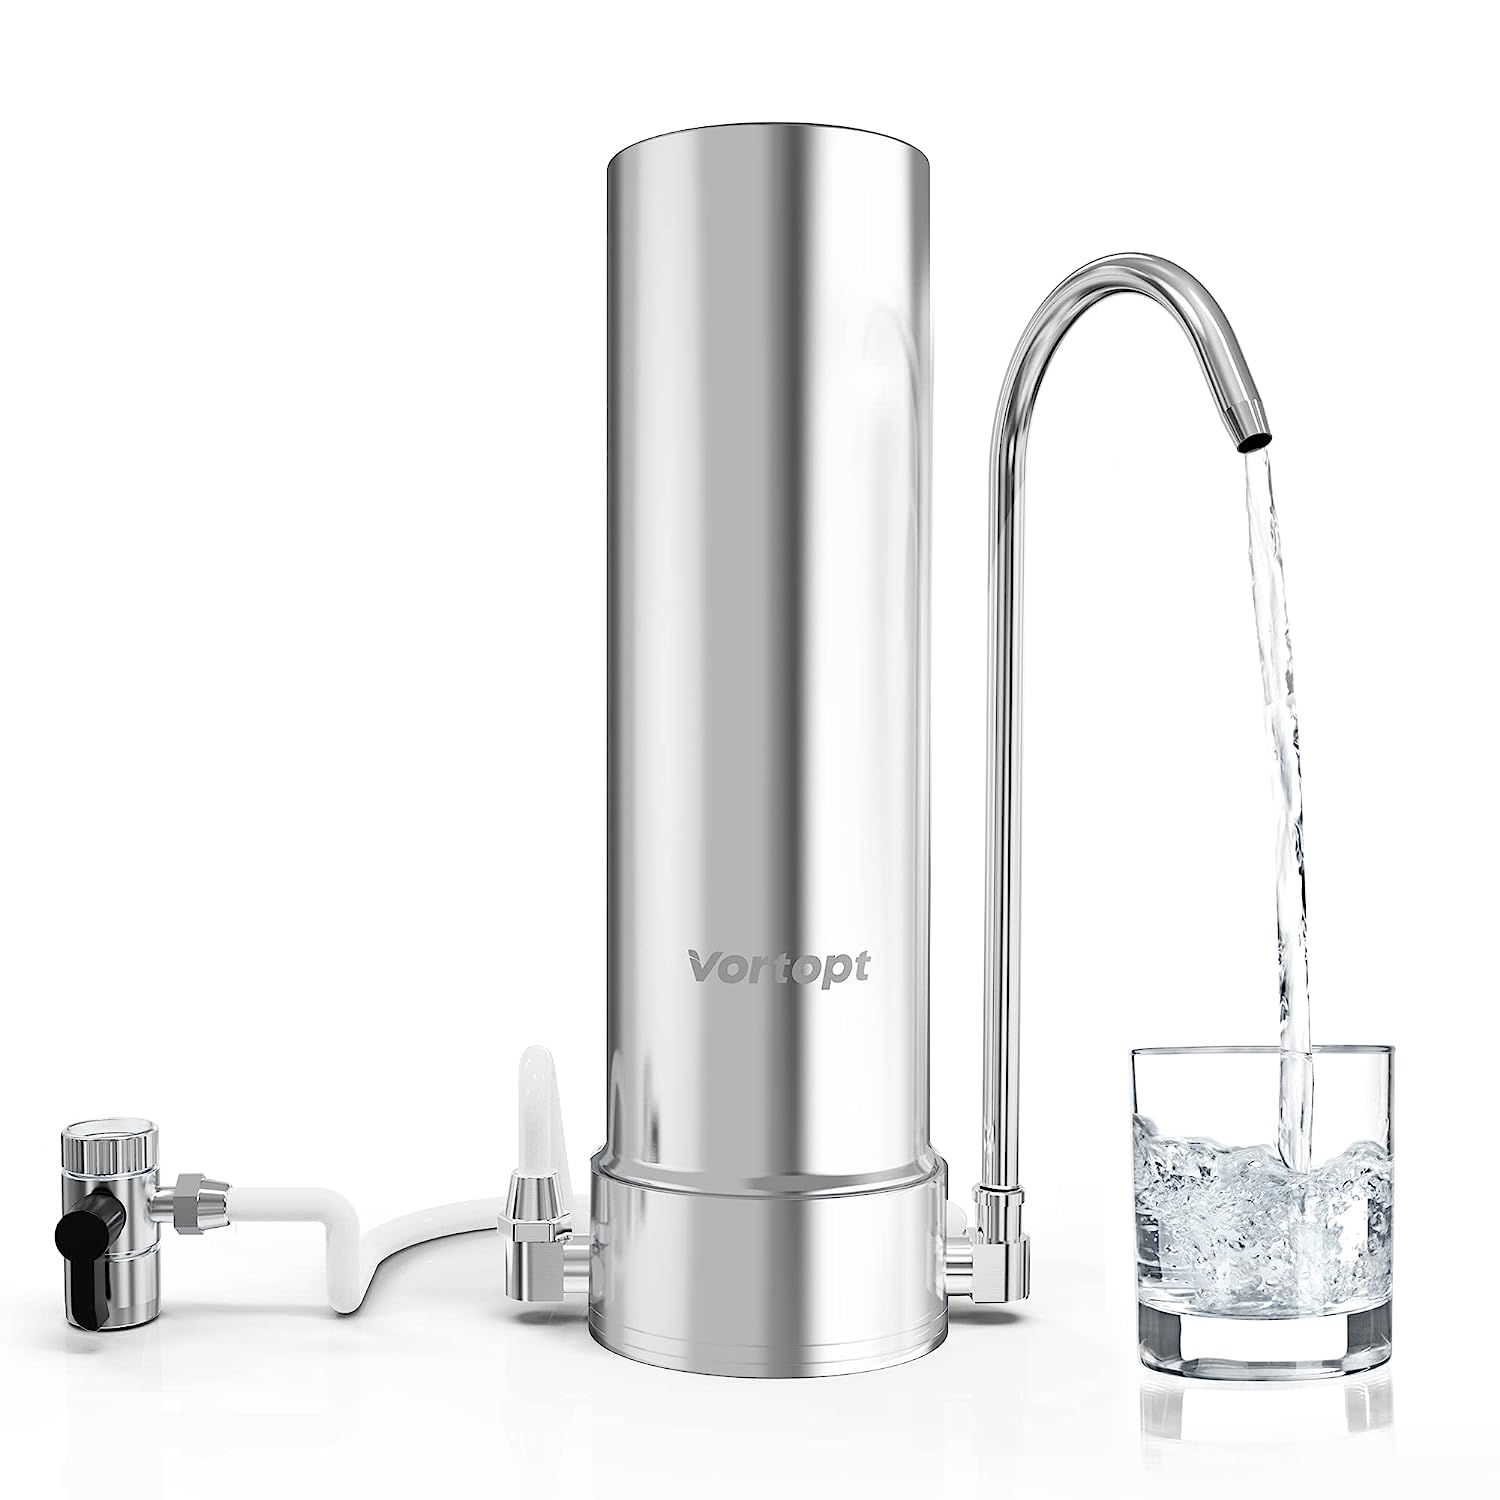 Vortopt Countertop Water Filter System - 5-Stage Stainless Steel Faucet Water Filter for 8000 Gallons - Water Purifier with KDF - Reduces Chlorine, Heavy Metals, Bad Odors - F7 - Includes 1 Filte